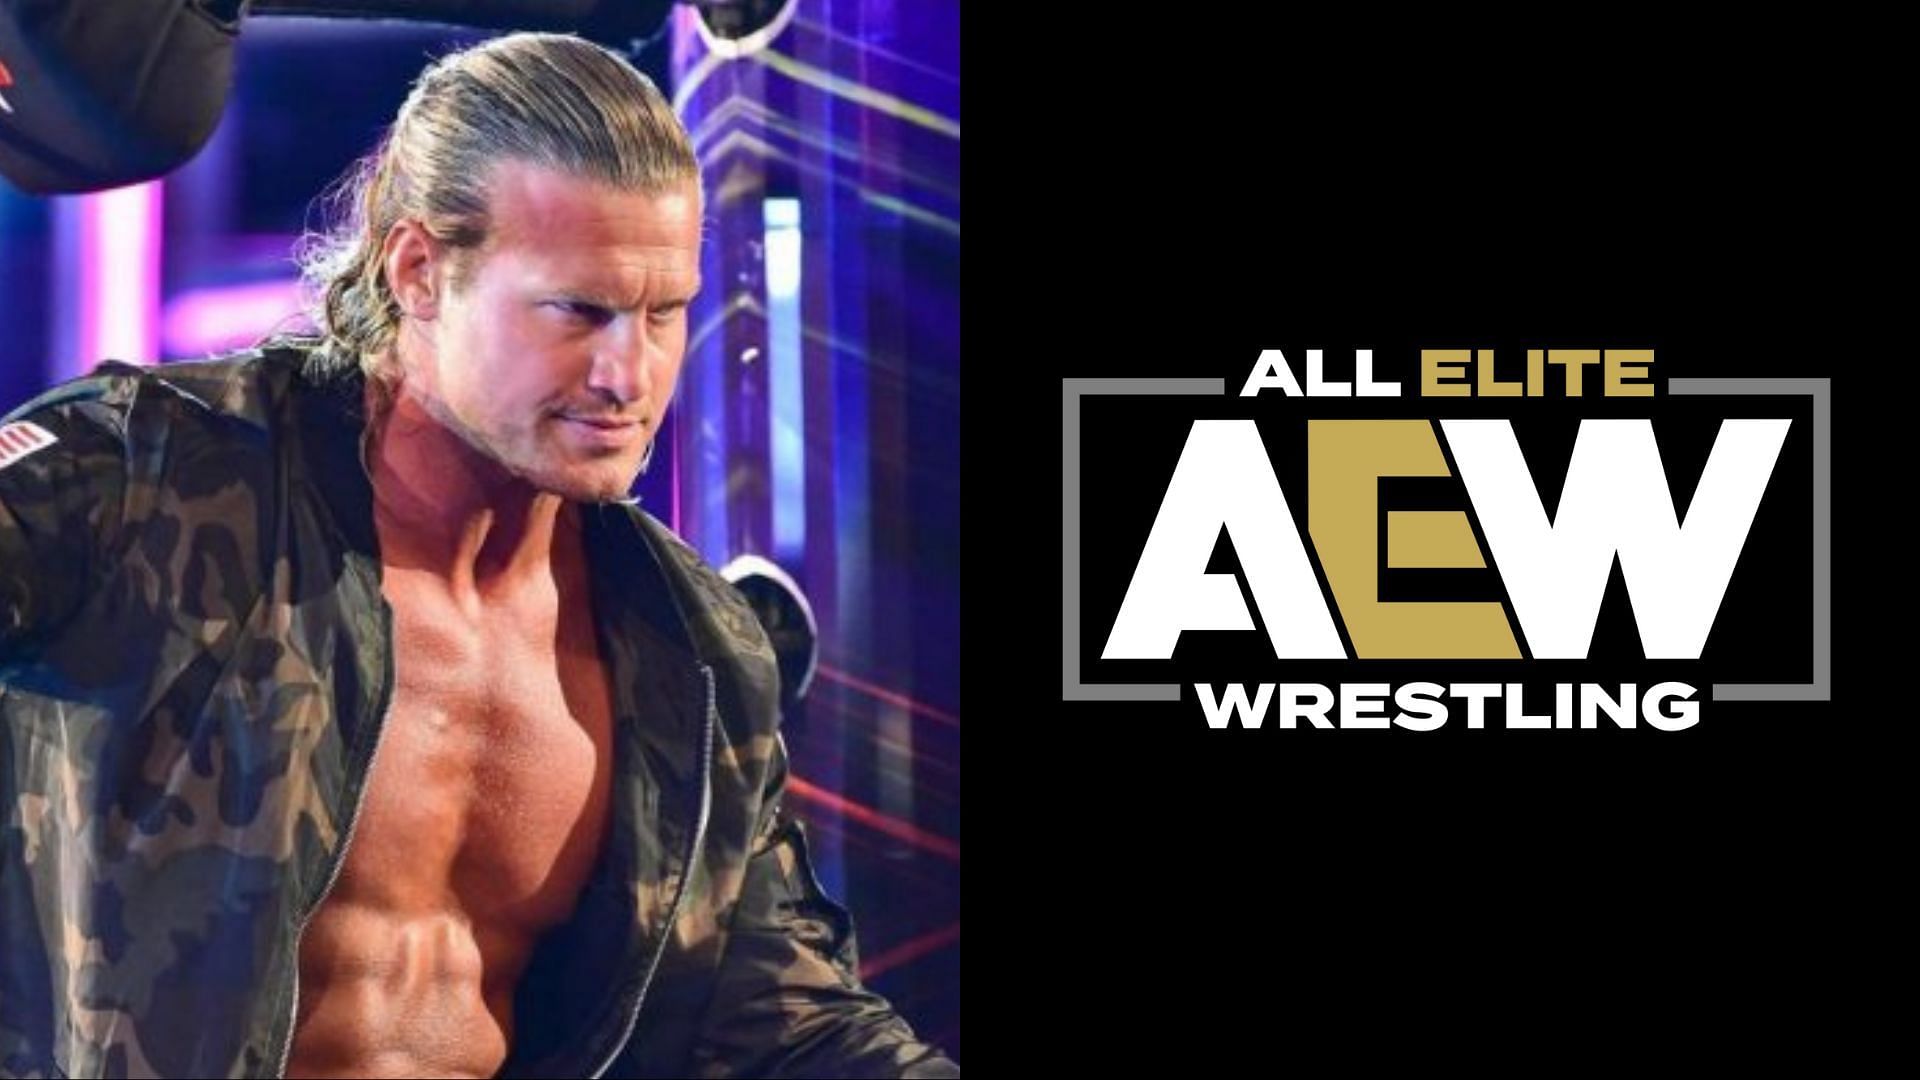 Dolph Ziggler has been linked to AEW following his release from WWE